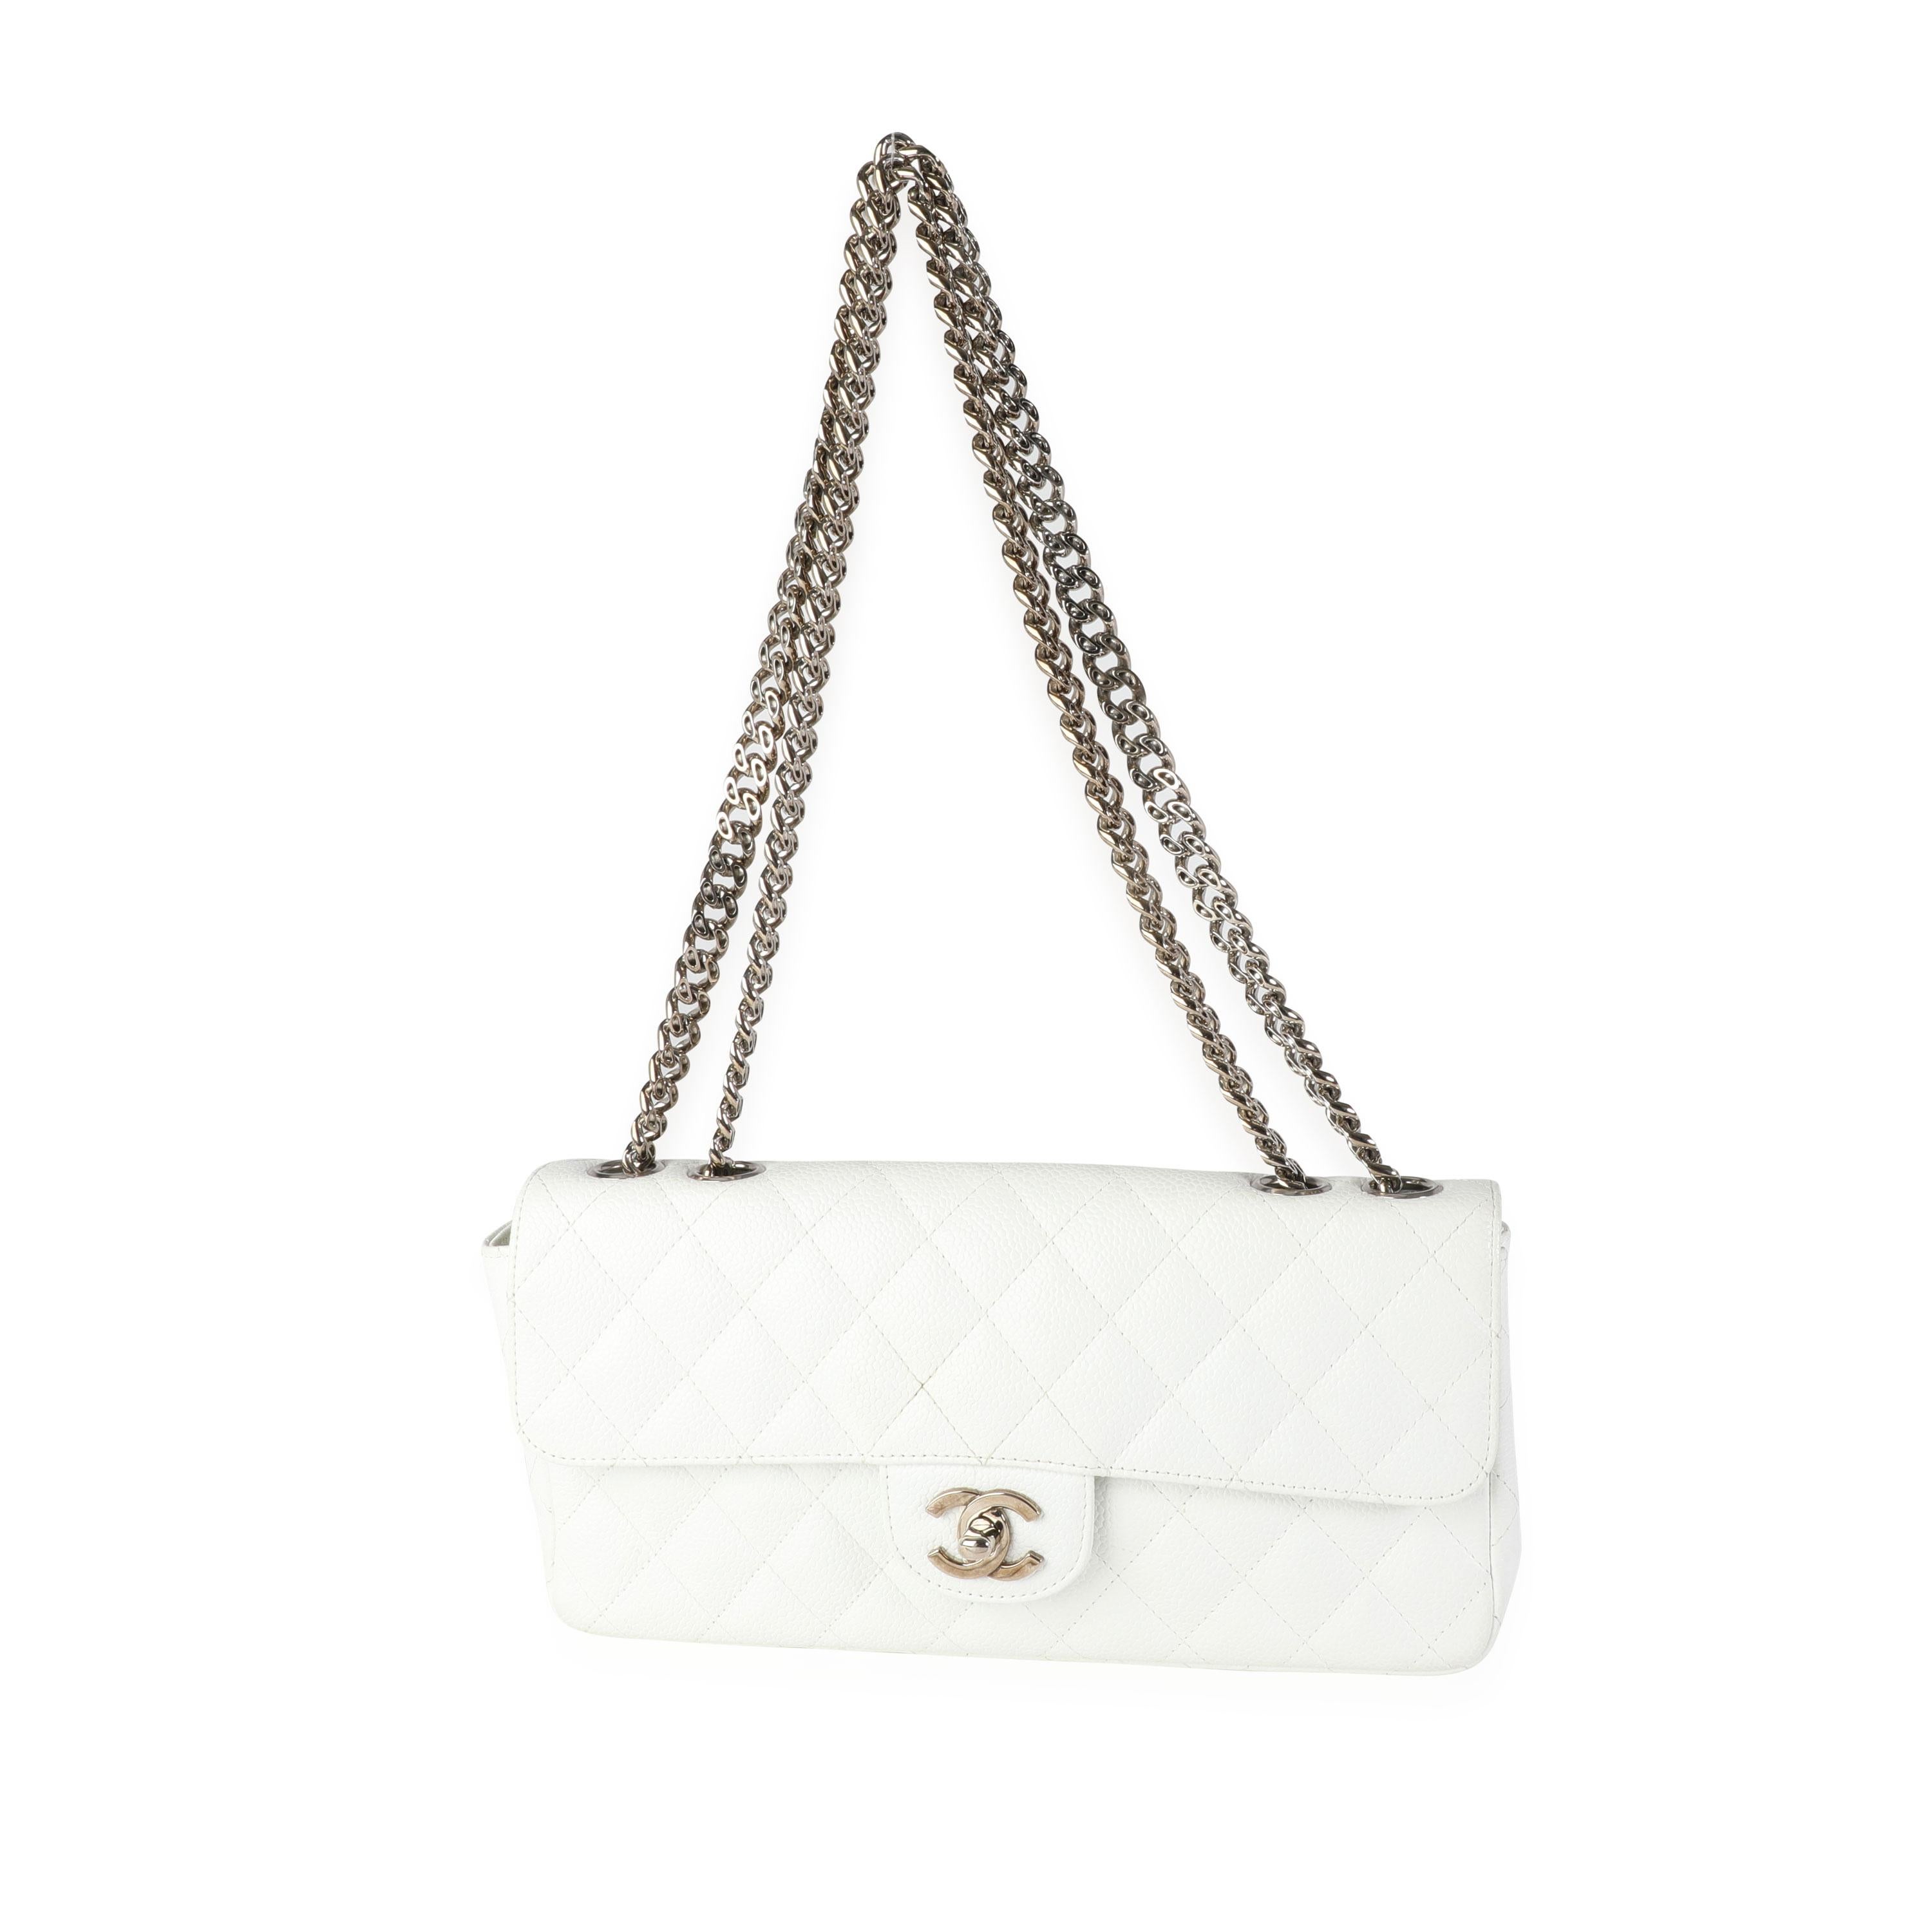 Listing Title: Chanel White Caviar Quilted East West Bijoux Single Flap Bag
SKU: 116254
Condition: Pre-owned (3000)
Handbag Condition: Very Good
Condition Comments: Very Good Condition. Scratching and tarnishing to hardware. Marks to interior due to